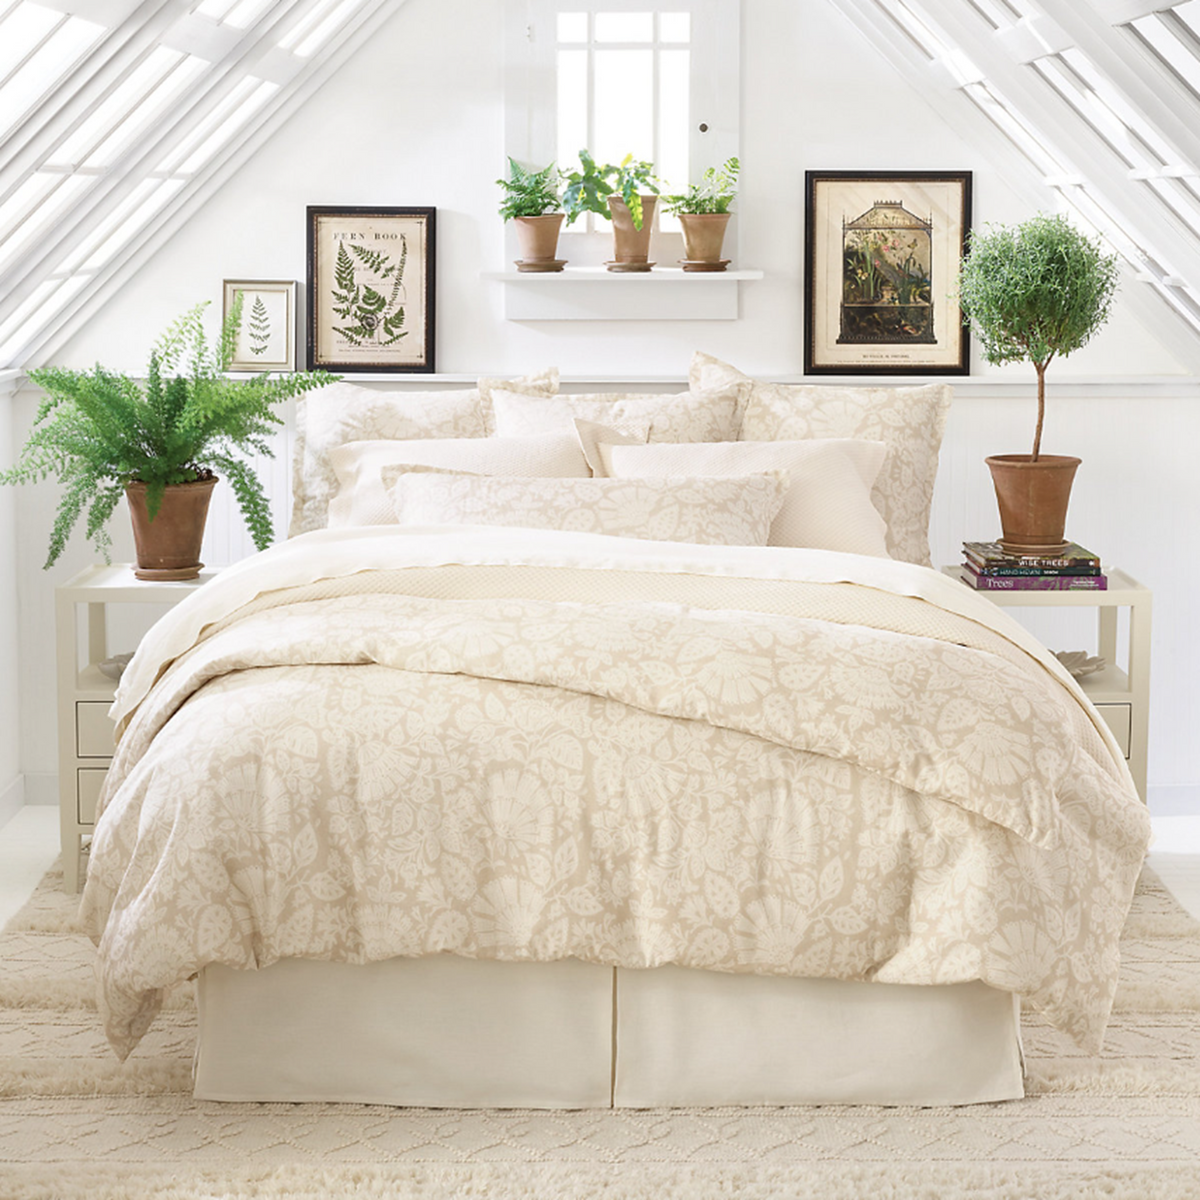 Lifestyle Image of Pine Cone Hill Petite Trellis Matelassé Coverlet and Shams in Ivory Color